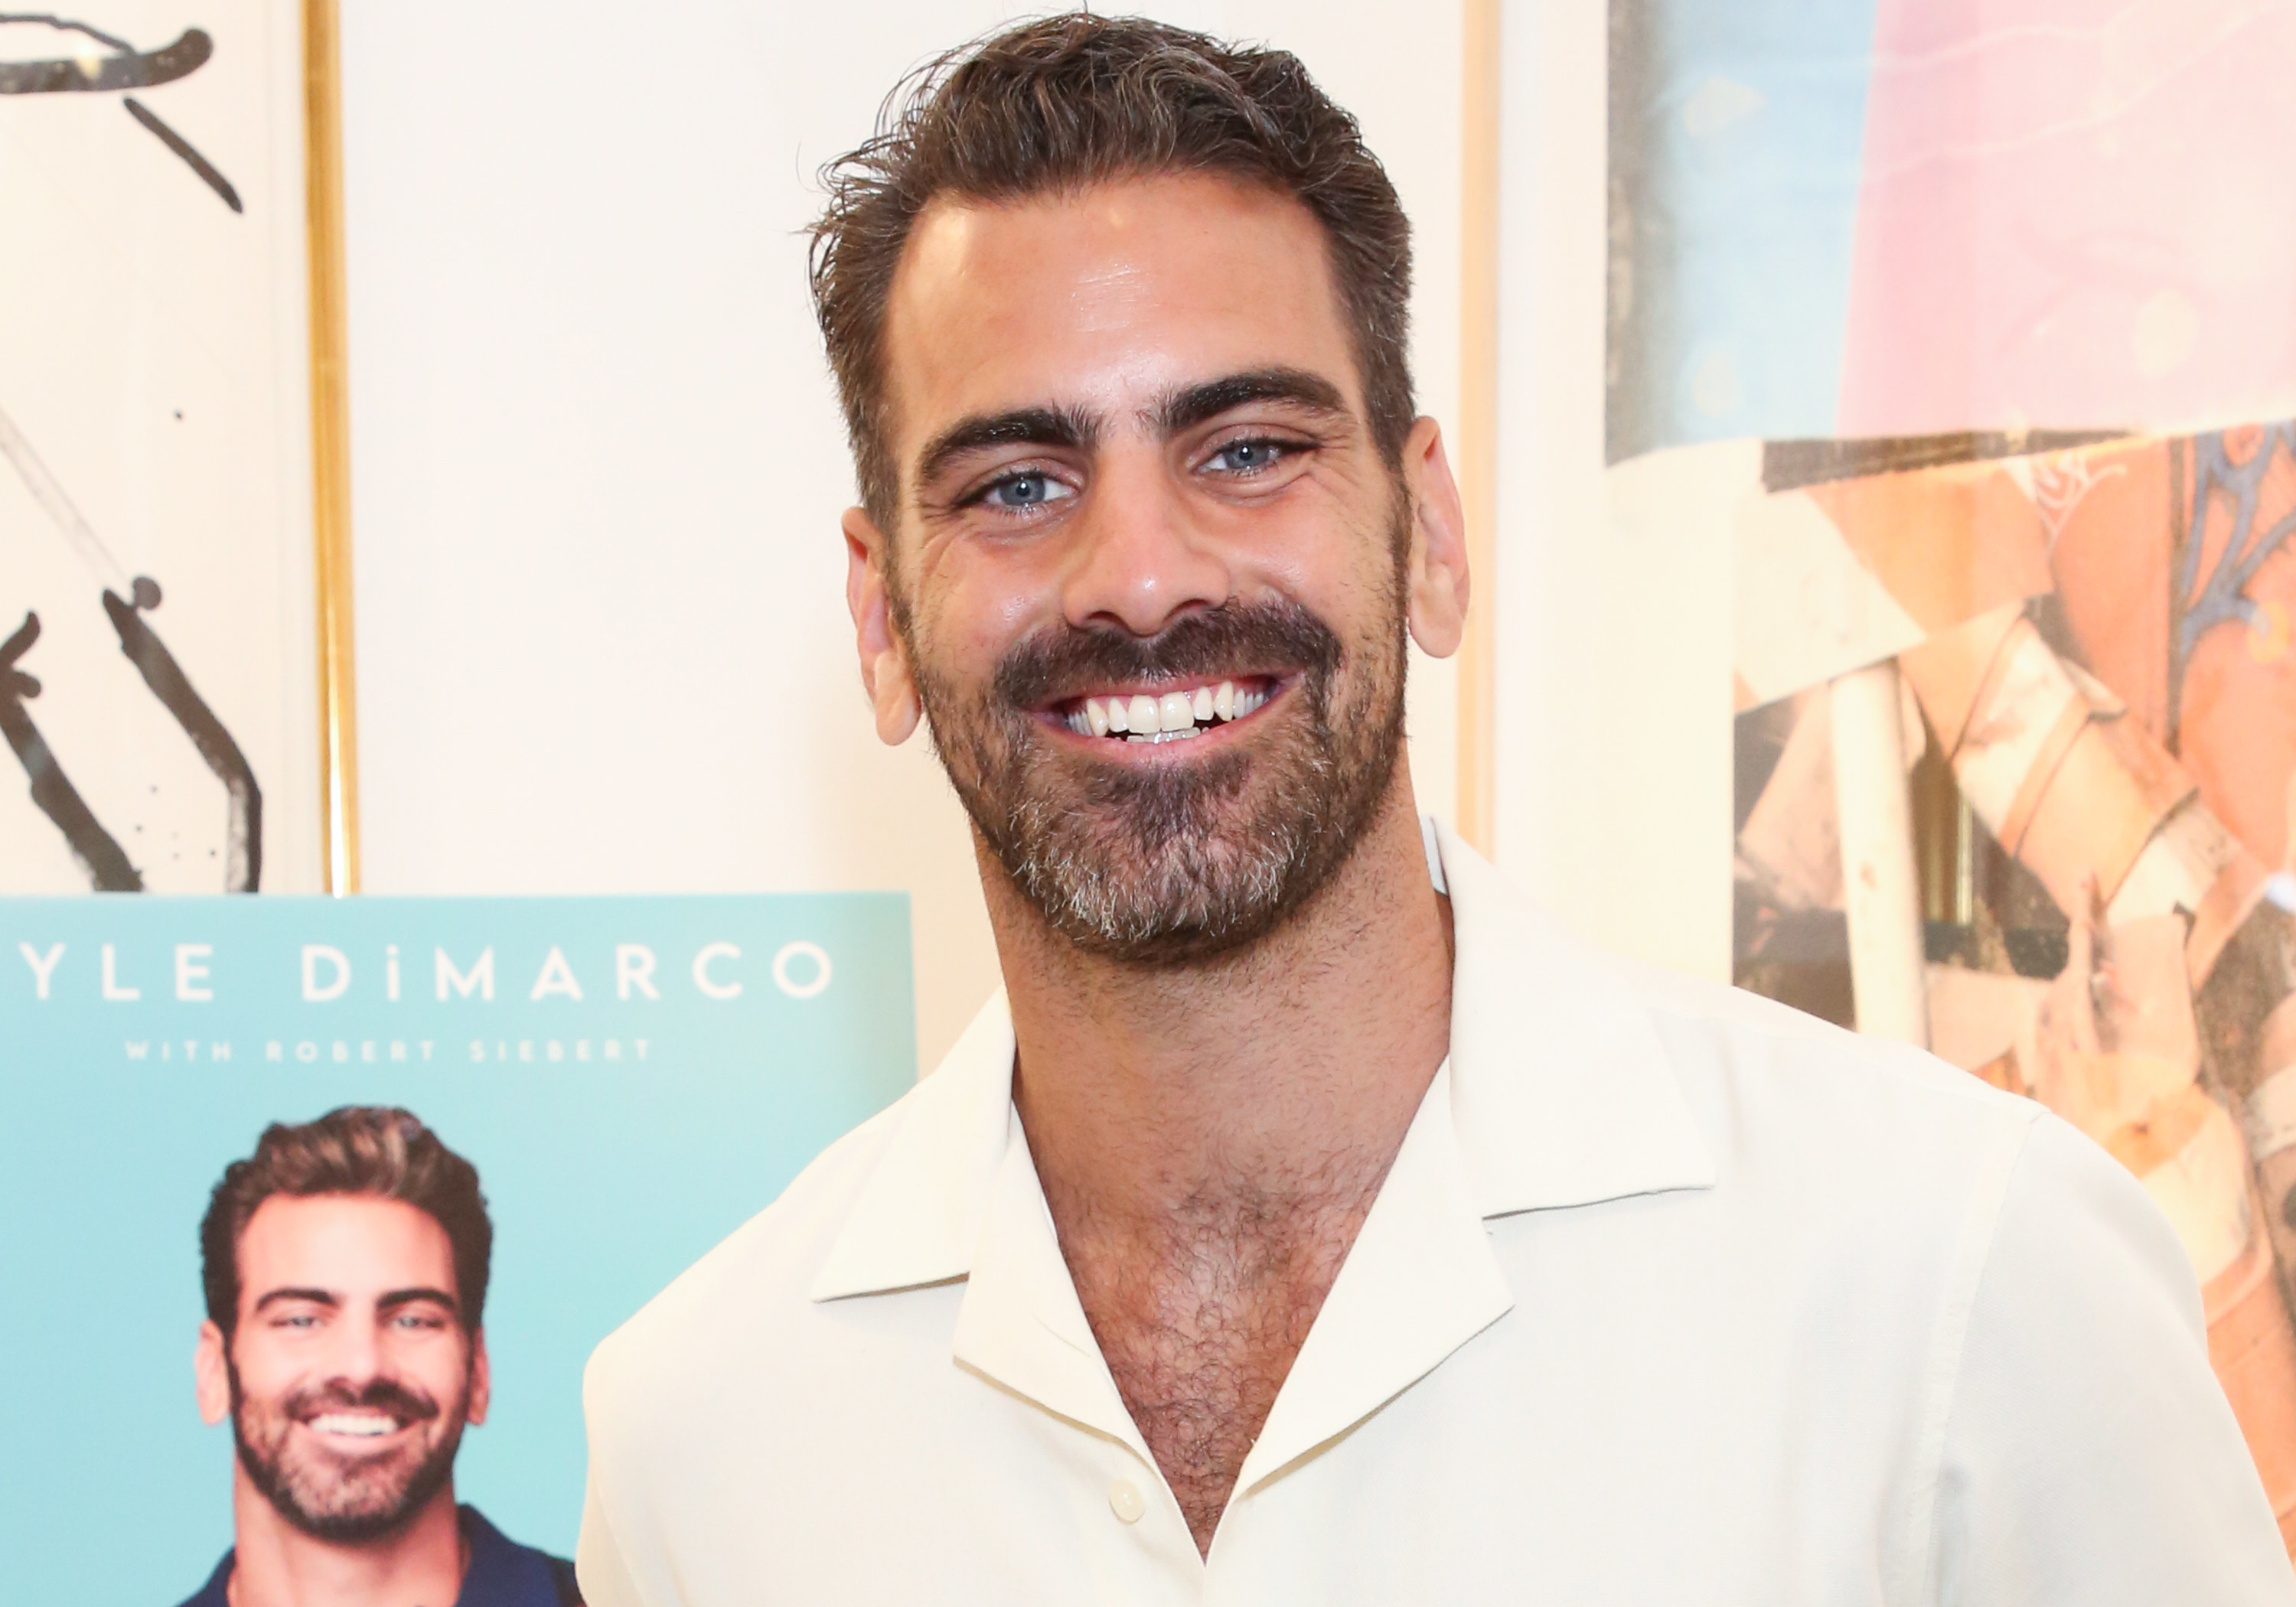 Nyle DiMarco at his book launch